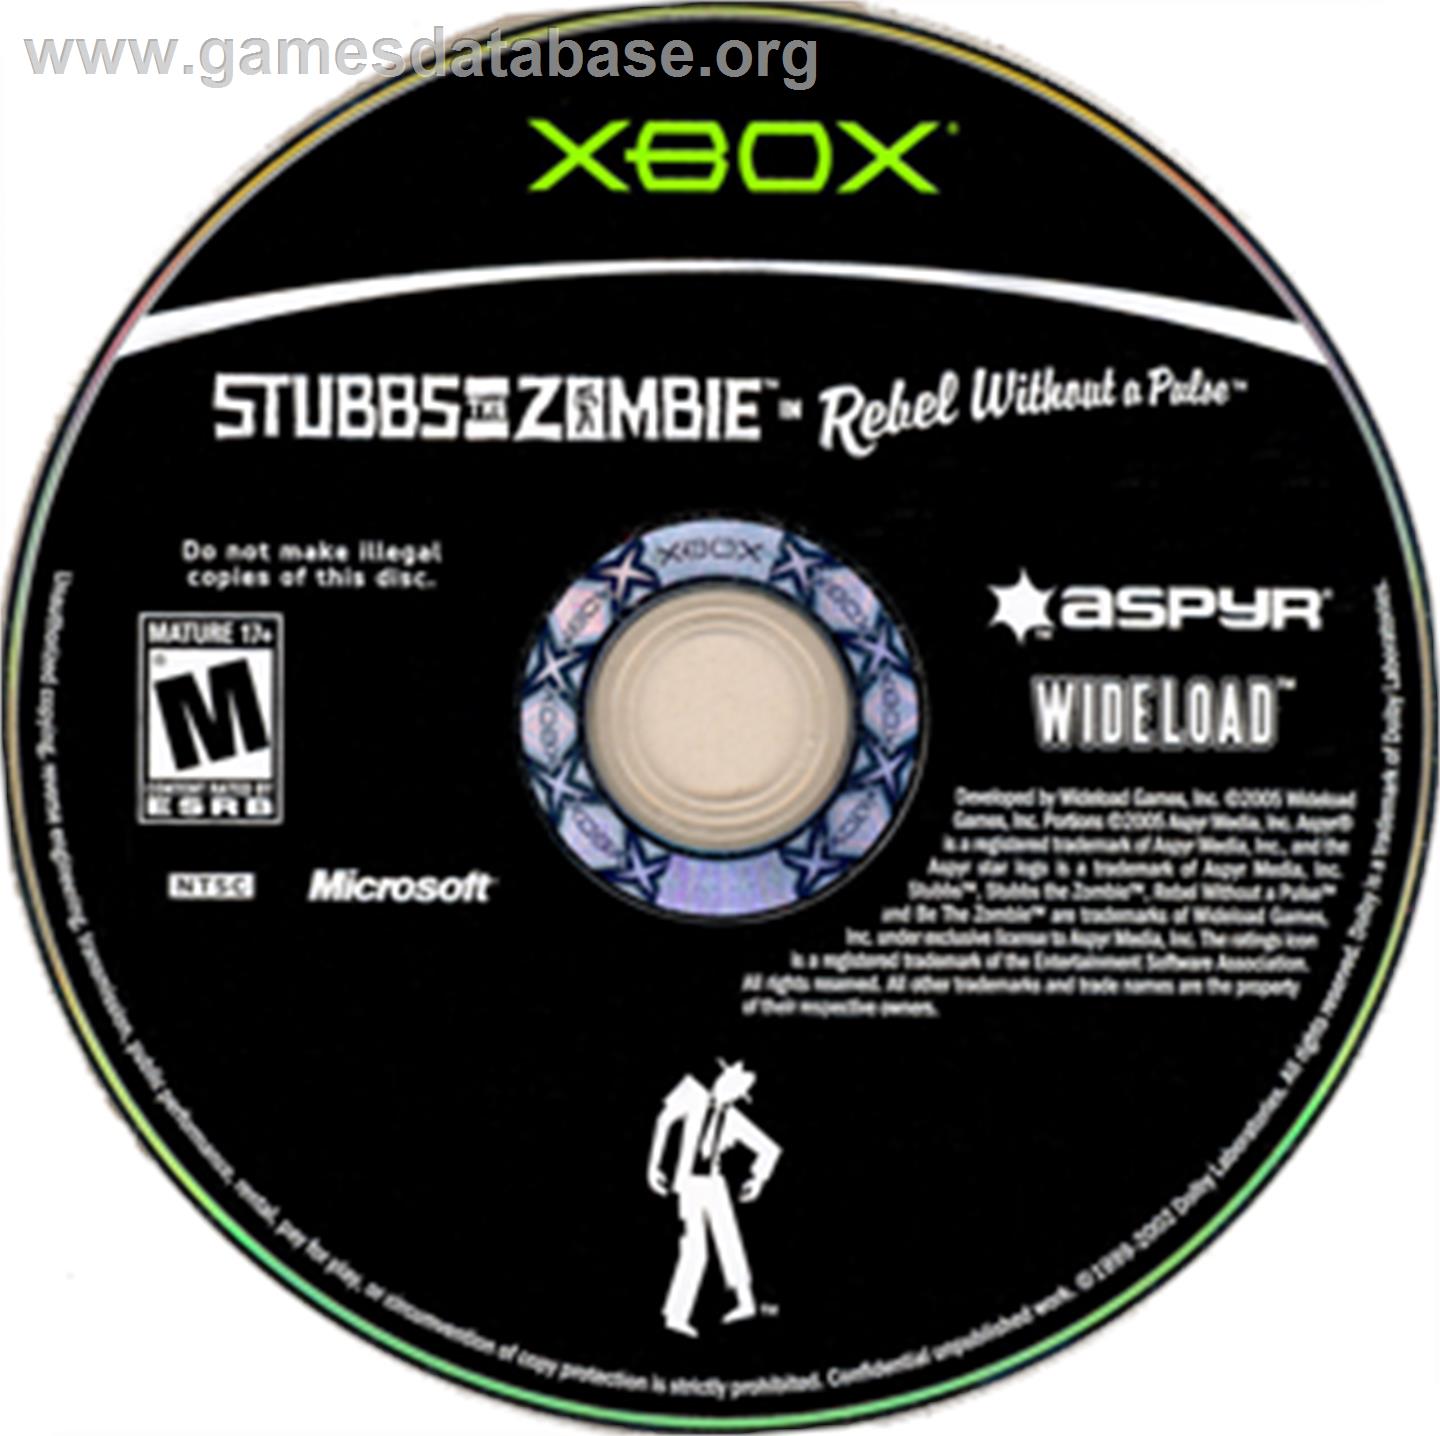 Stubbs the Zombie in Rebel Without a Pulse - Microsoft Xbox - Artwork - CD